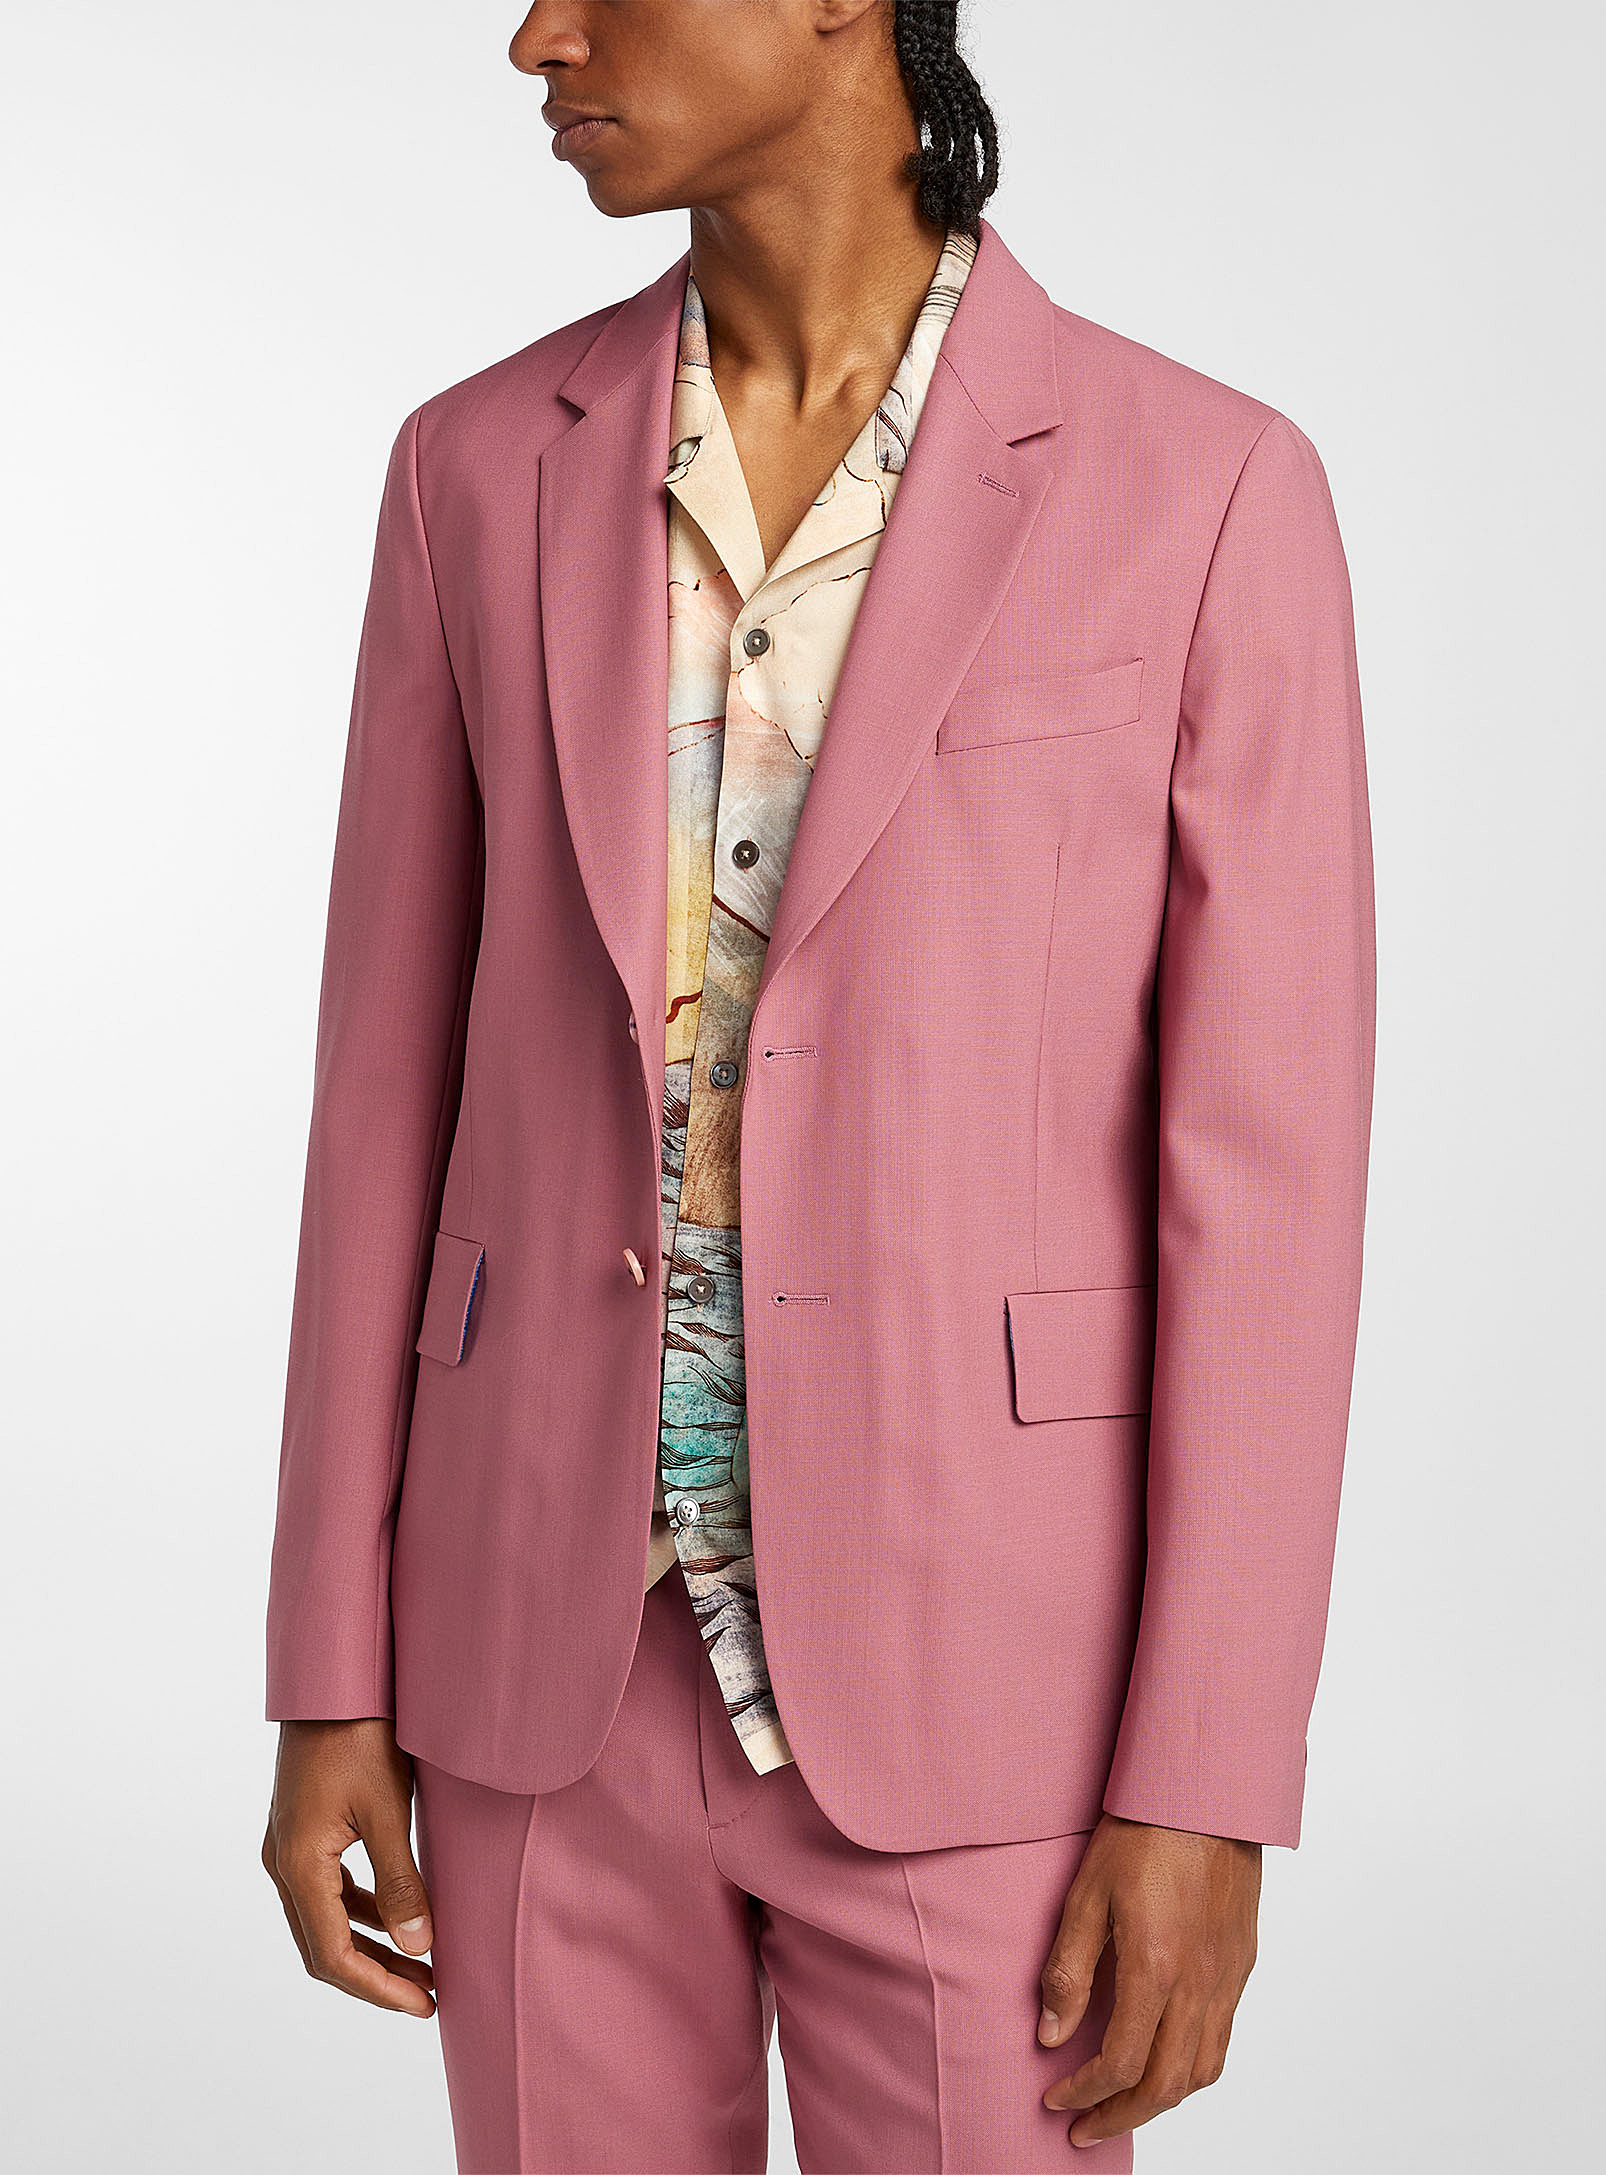 Paul Smith Pure Wool Pink Jacket